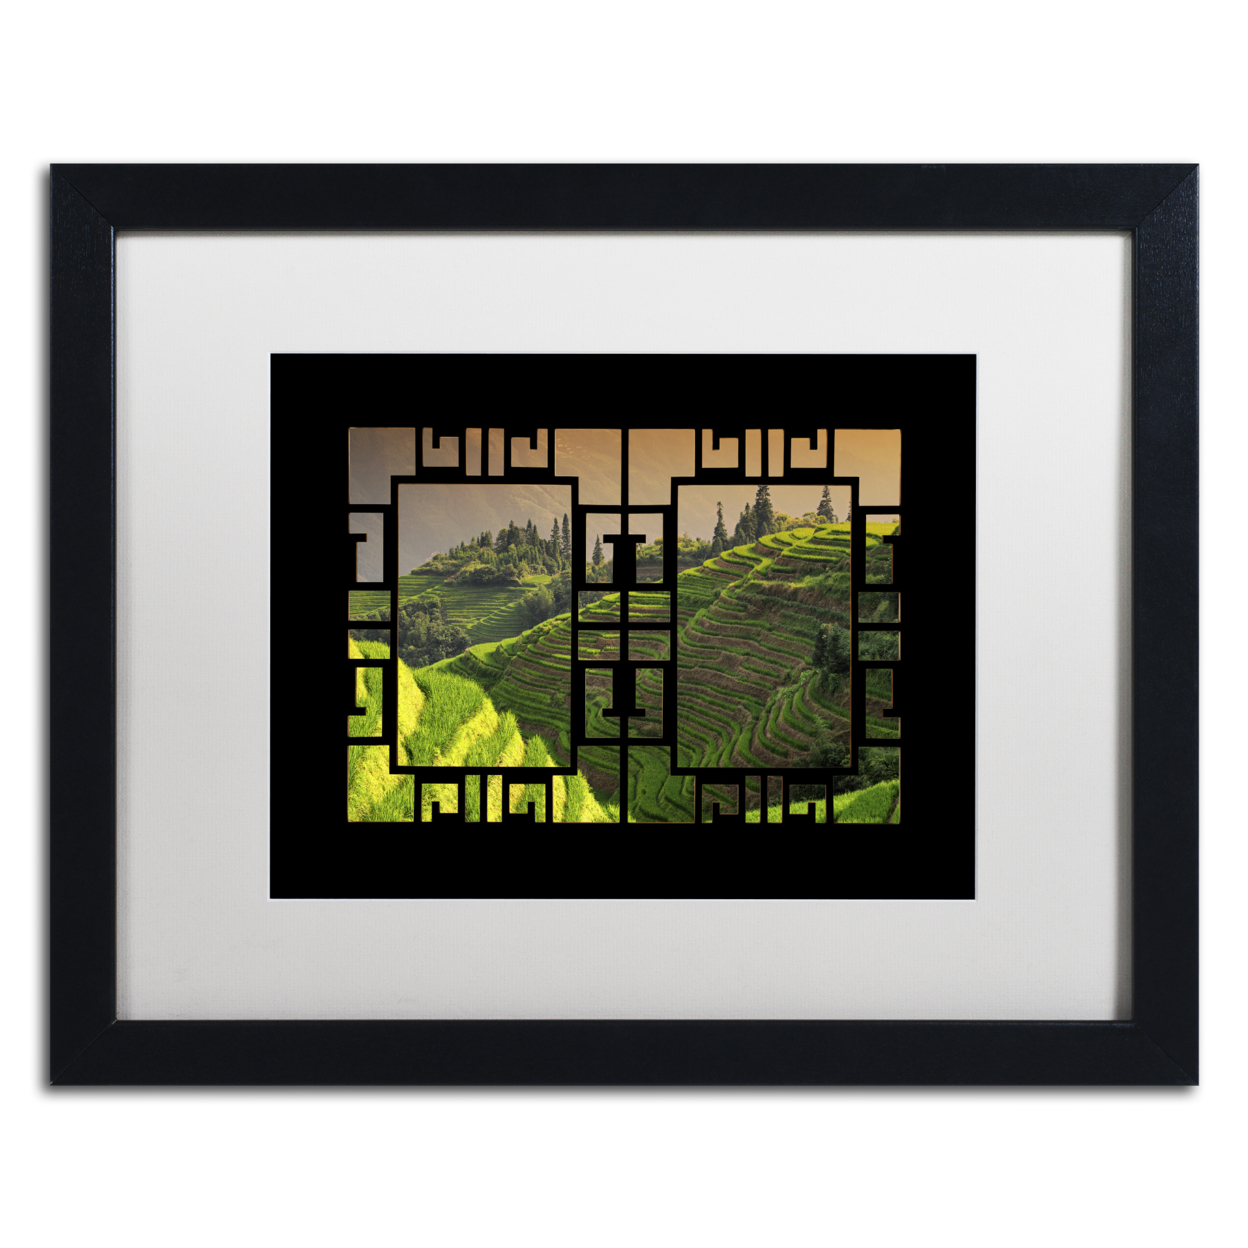 Philippe Hugonnard 'Rice View IV' Black Wooden Framed Art 18 X 22 Inches